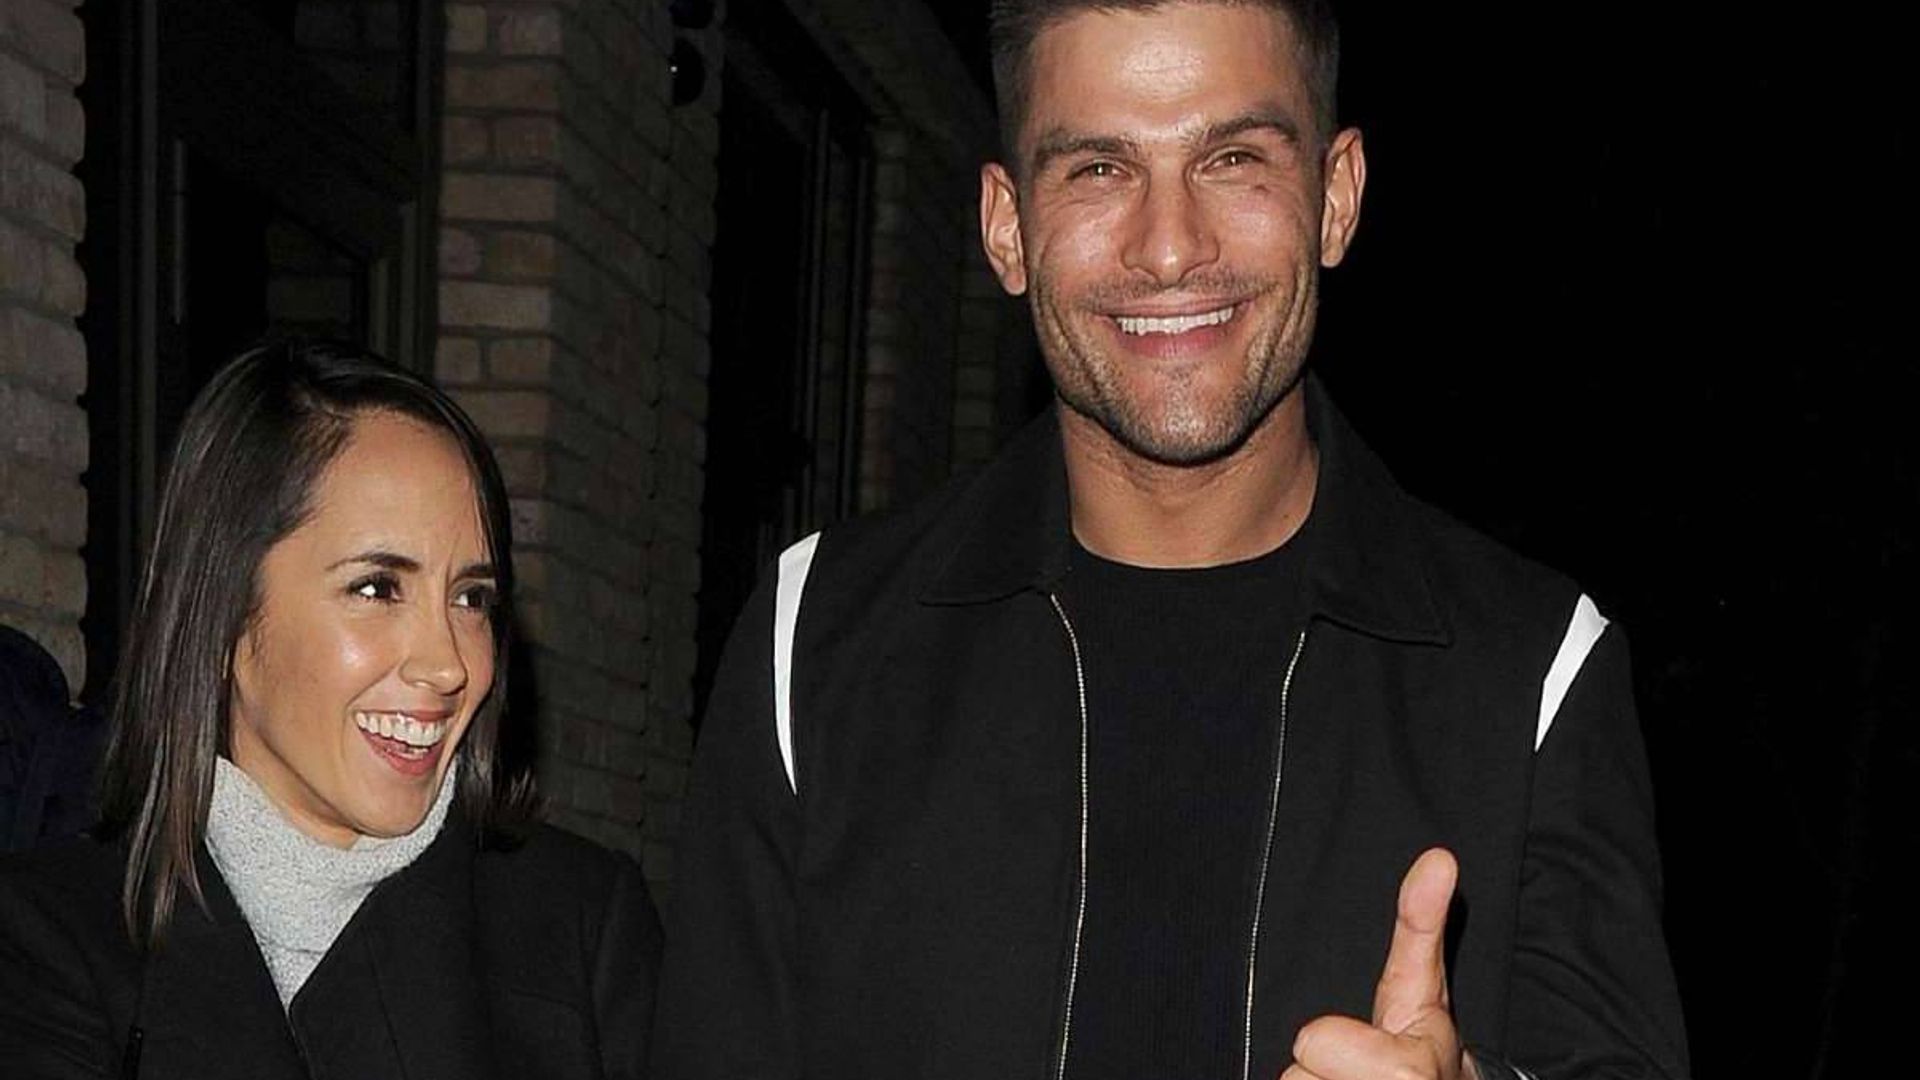 Strictly's Aljaz Skorjanec melts hearts with adorable baby video after family reunion